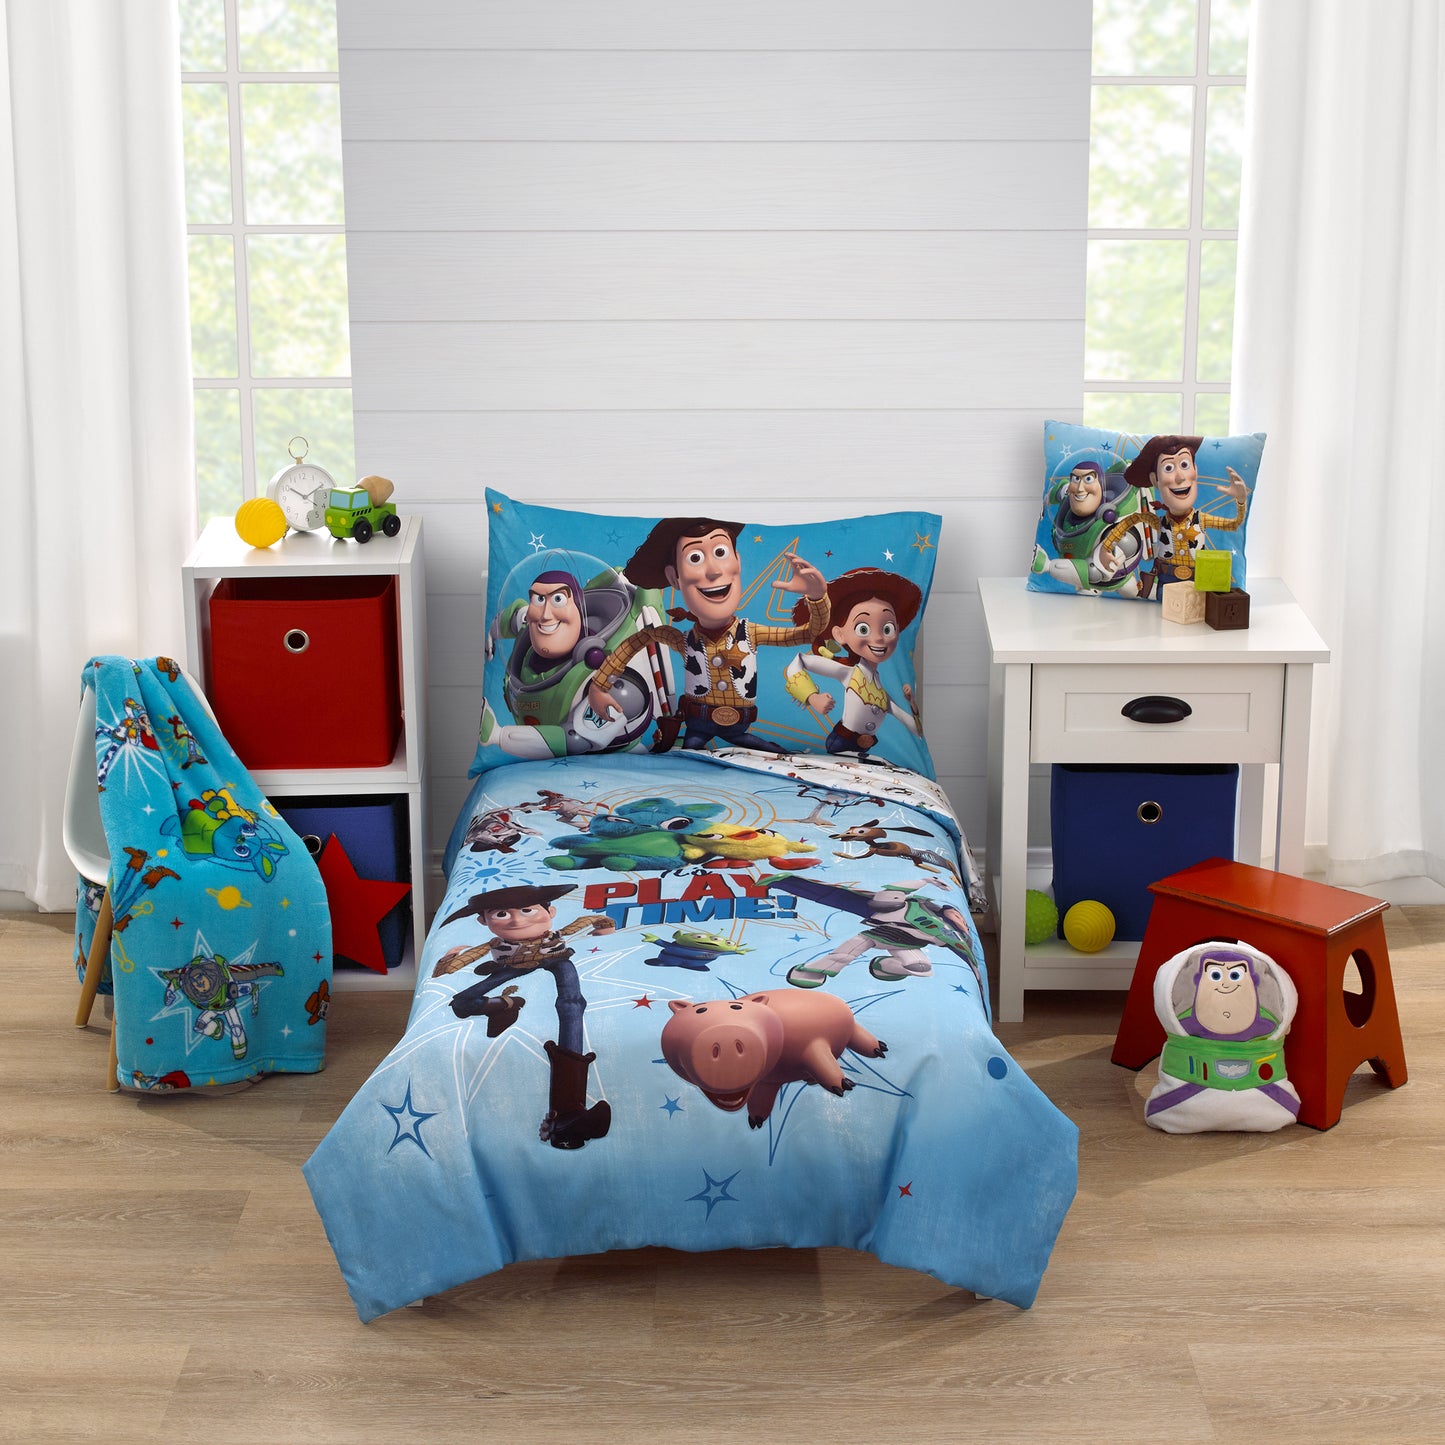 Disney Toy Story It's Play Time Blue, Green, Red, and Yellow, Woody and Buzz 4 Piece Toddler Bed Set - Comforter, Fitted Bottom Sheet, Flat Top Sheet, and Reversible Pillowcase